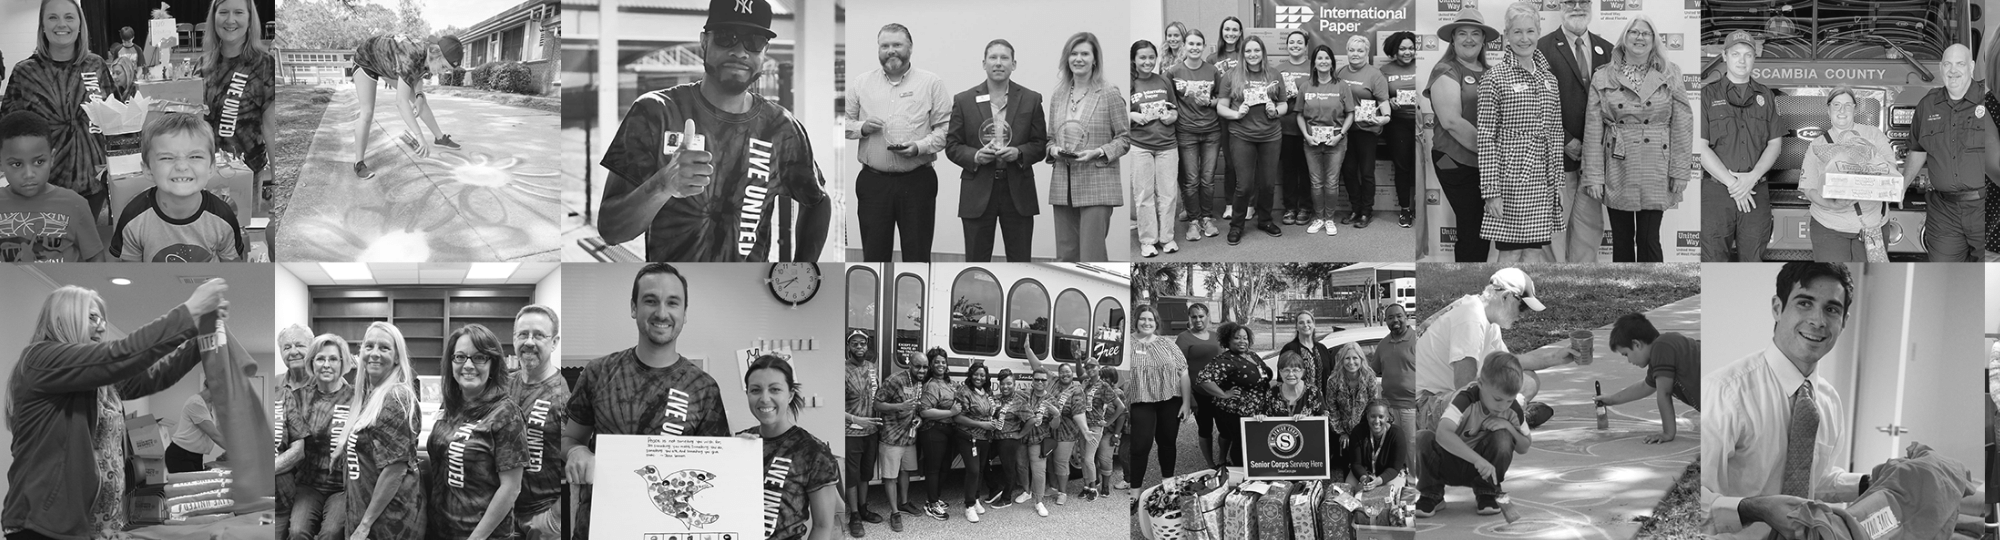 Collage from events through out the years at United way of west florida in black and white